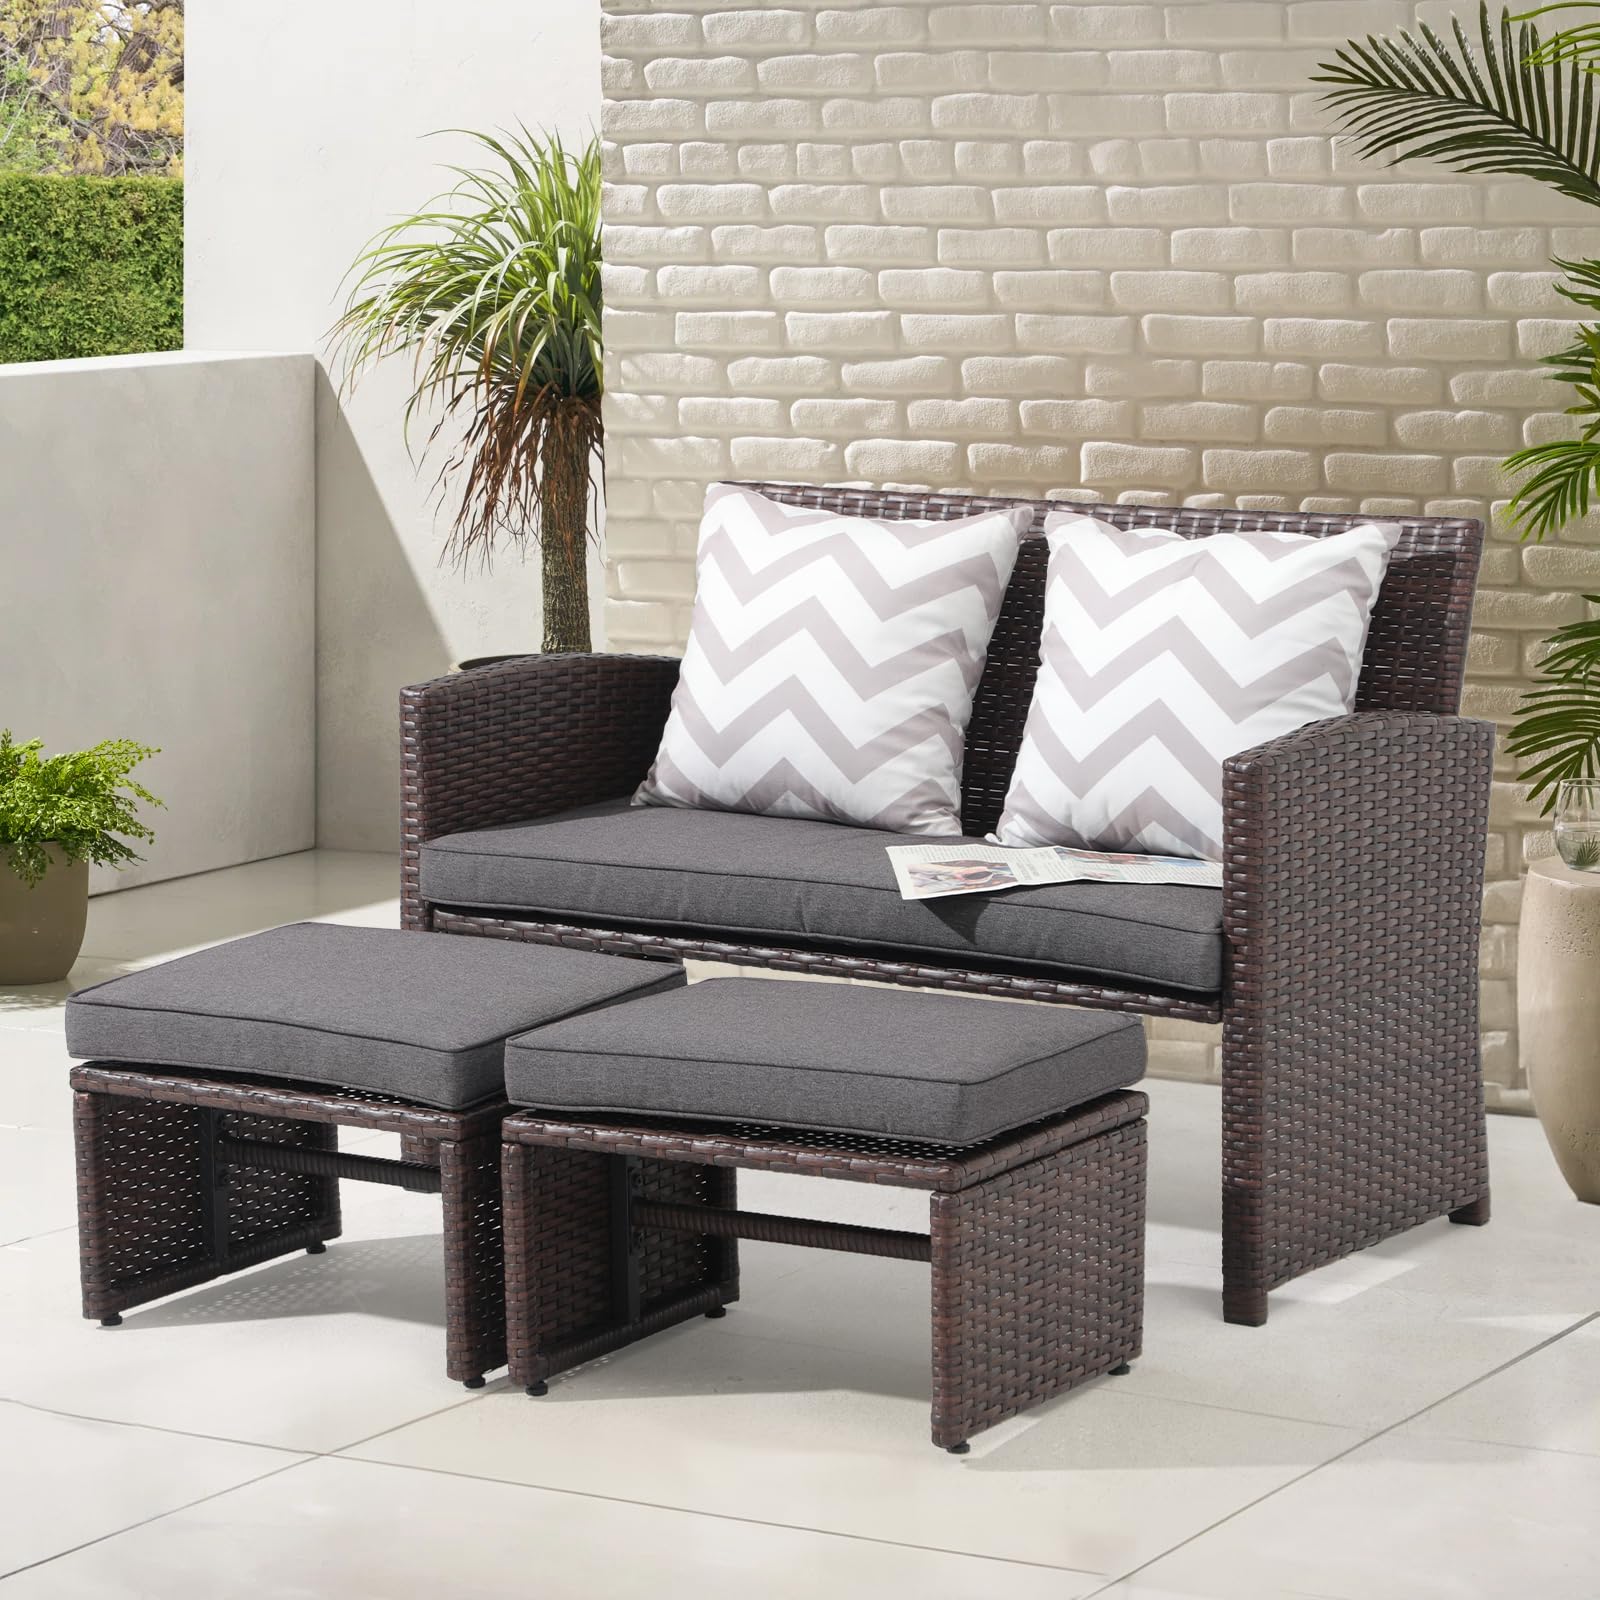 3pcs Small Outdoor Loveseat with Ottomans, 3 Cushion Colors